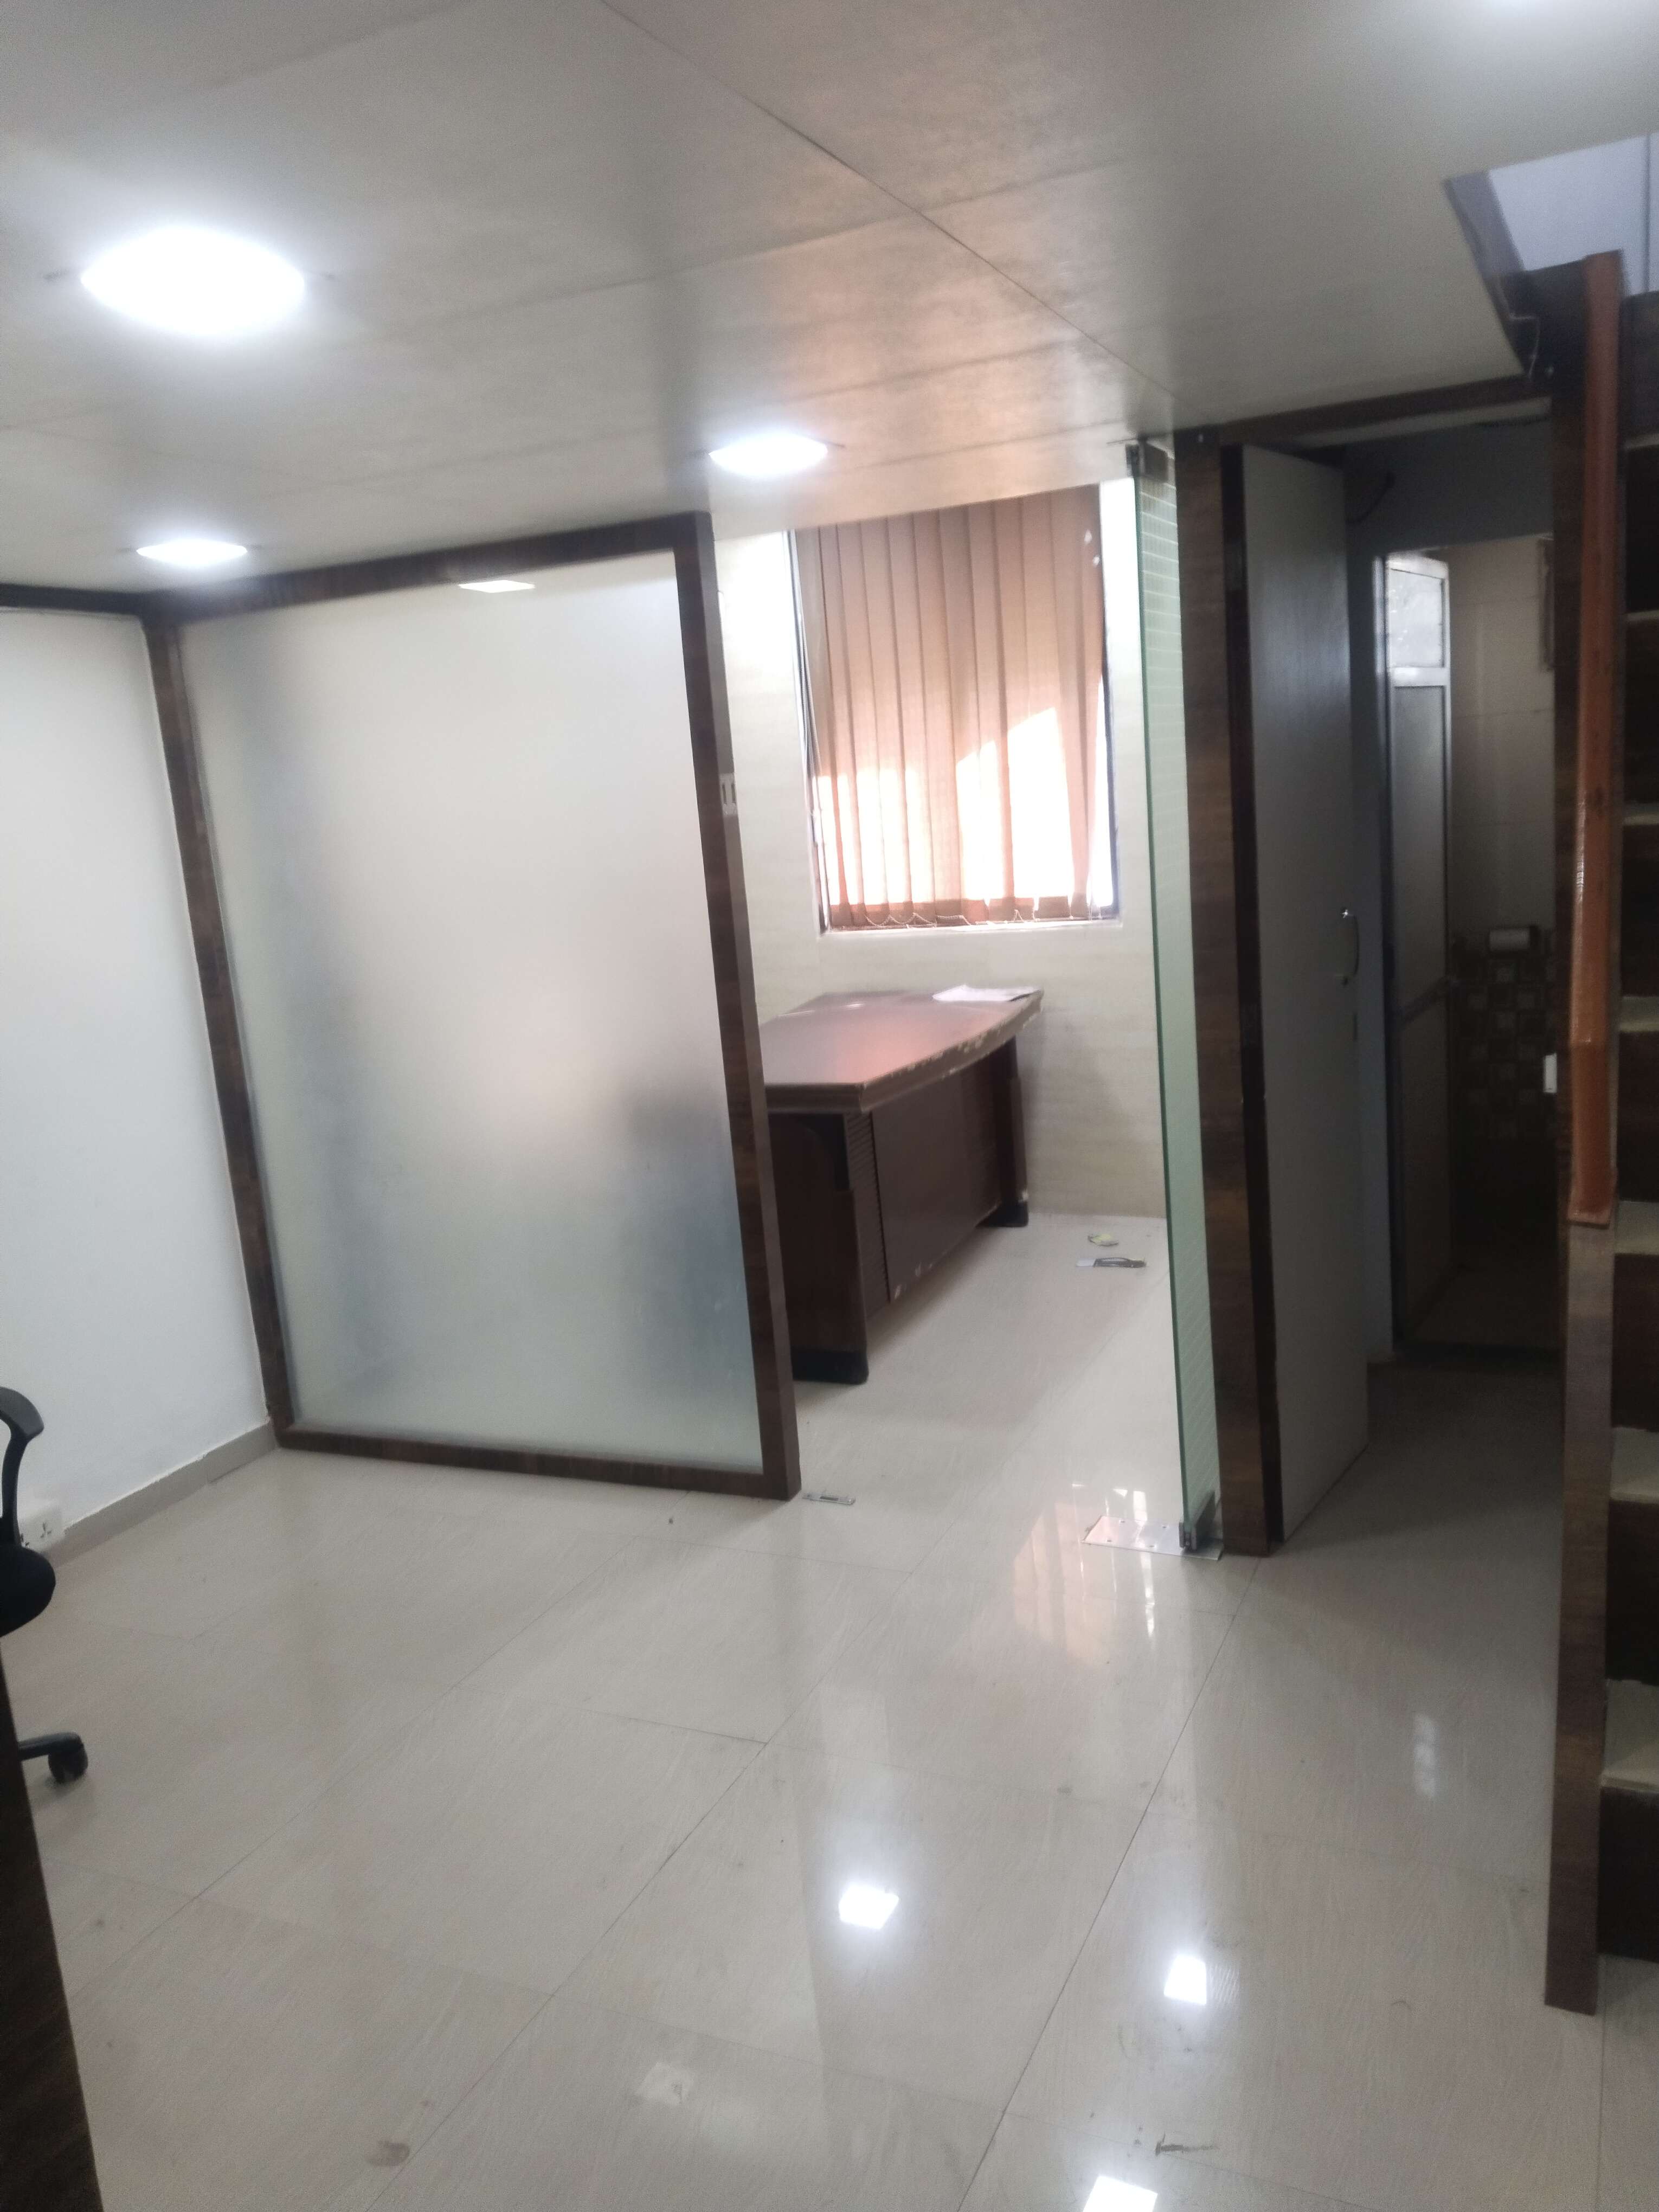 Rental Commercial Office Space 365 . in Stanford Plaza, Andheri West  Mumbai - 5142547